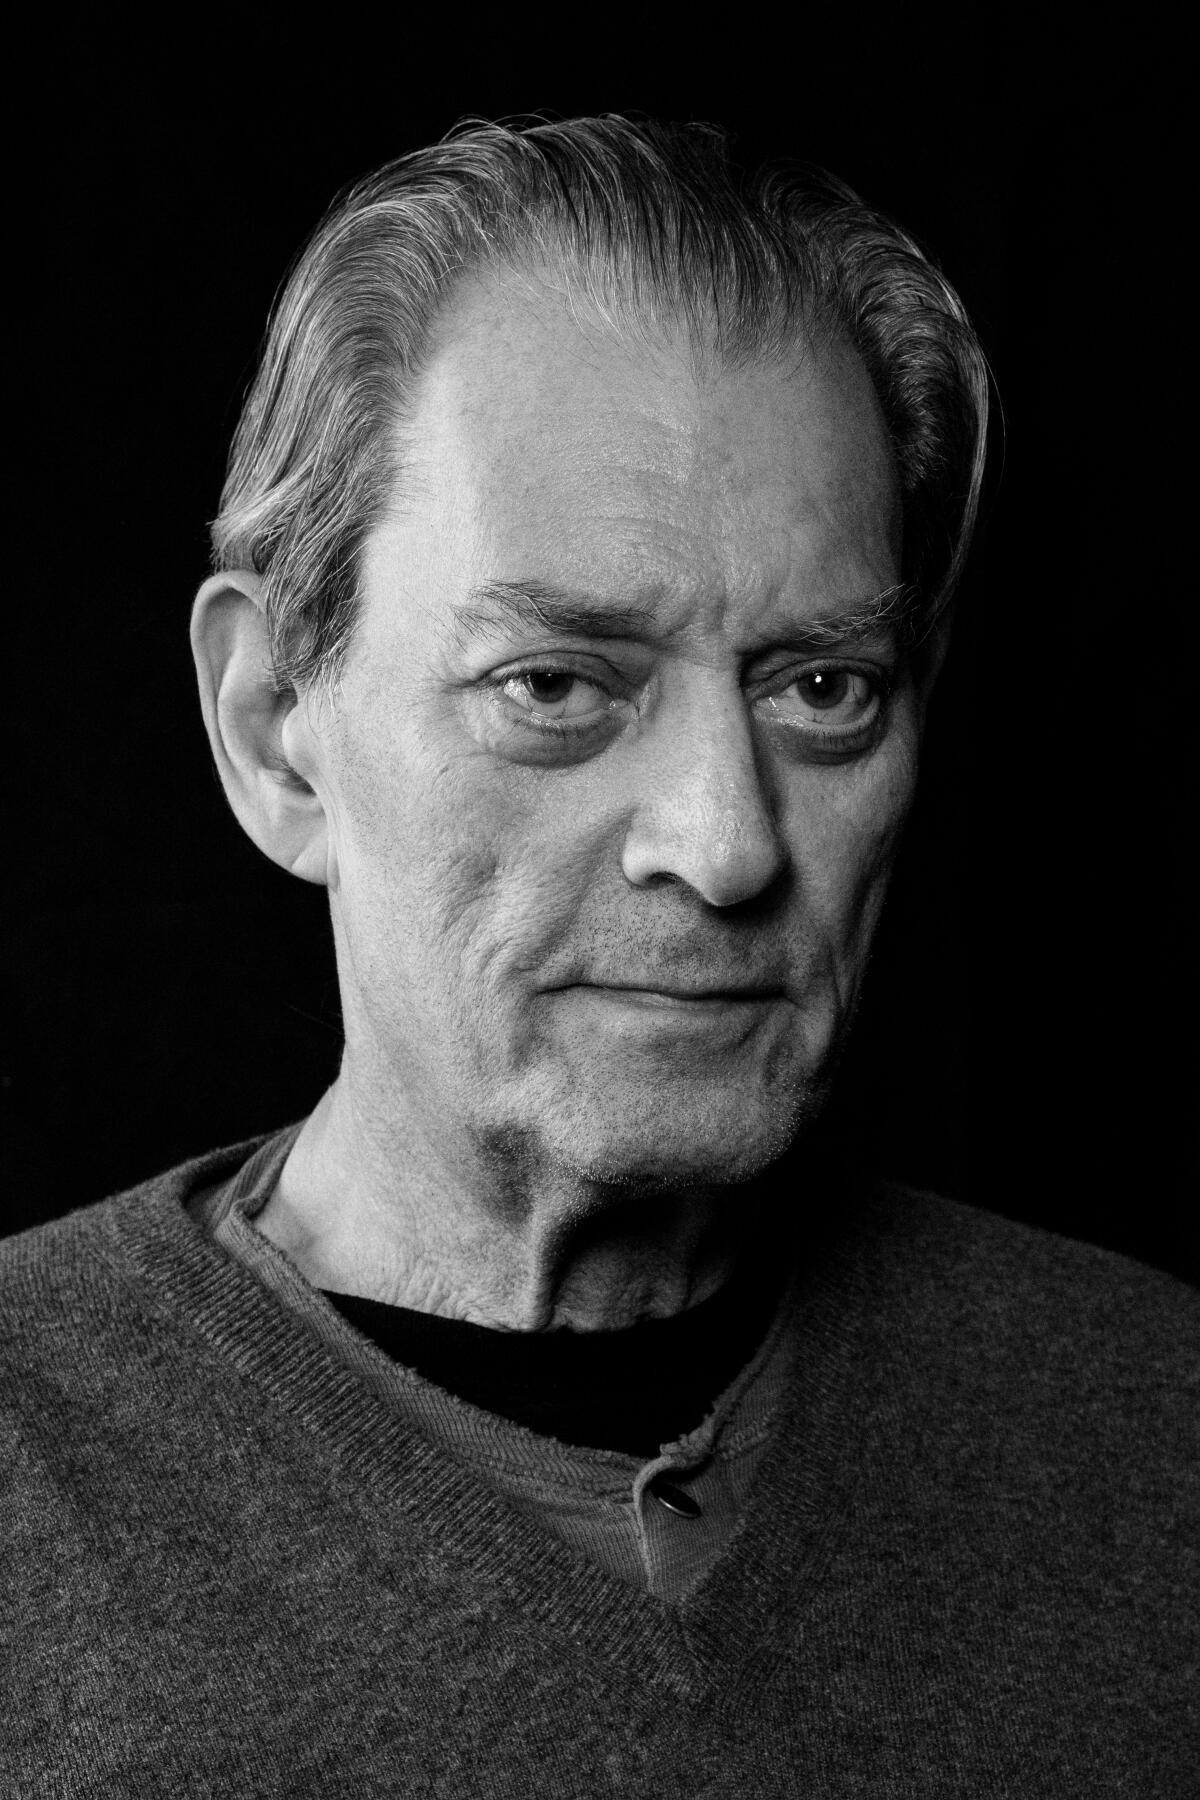 Paul Auster's 'Report From the Interior' - The New York Times